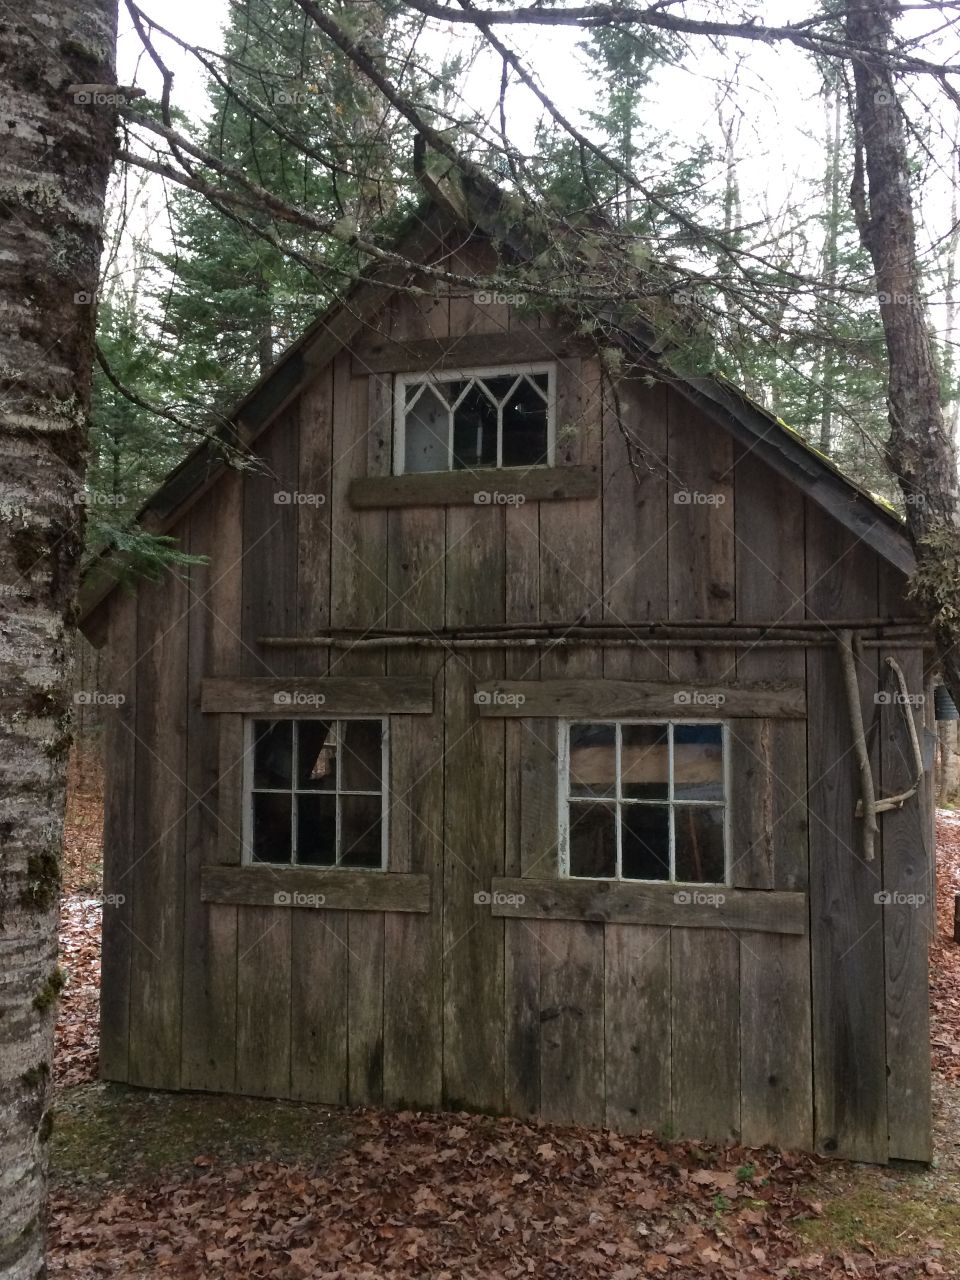 Maple sugar shack in the woods 